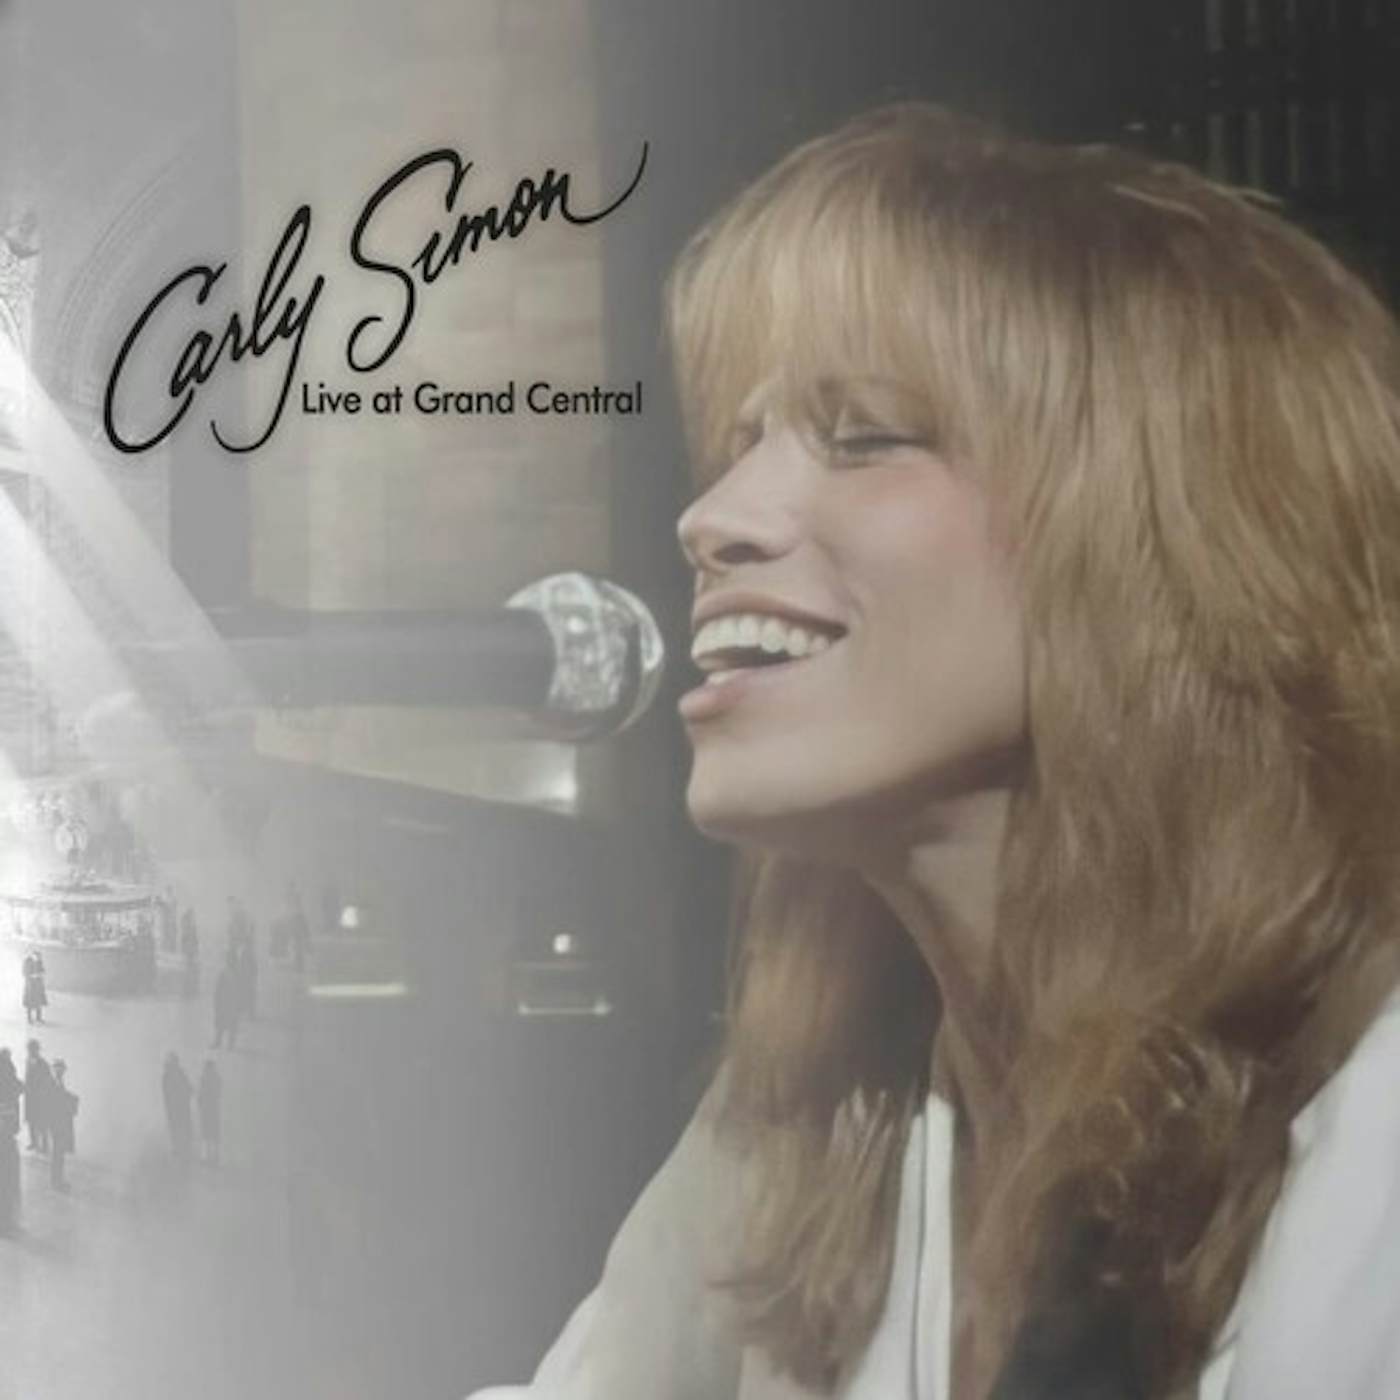 Carly Simon LIVE AT GRAND CENTRAL CD